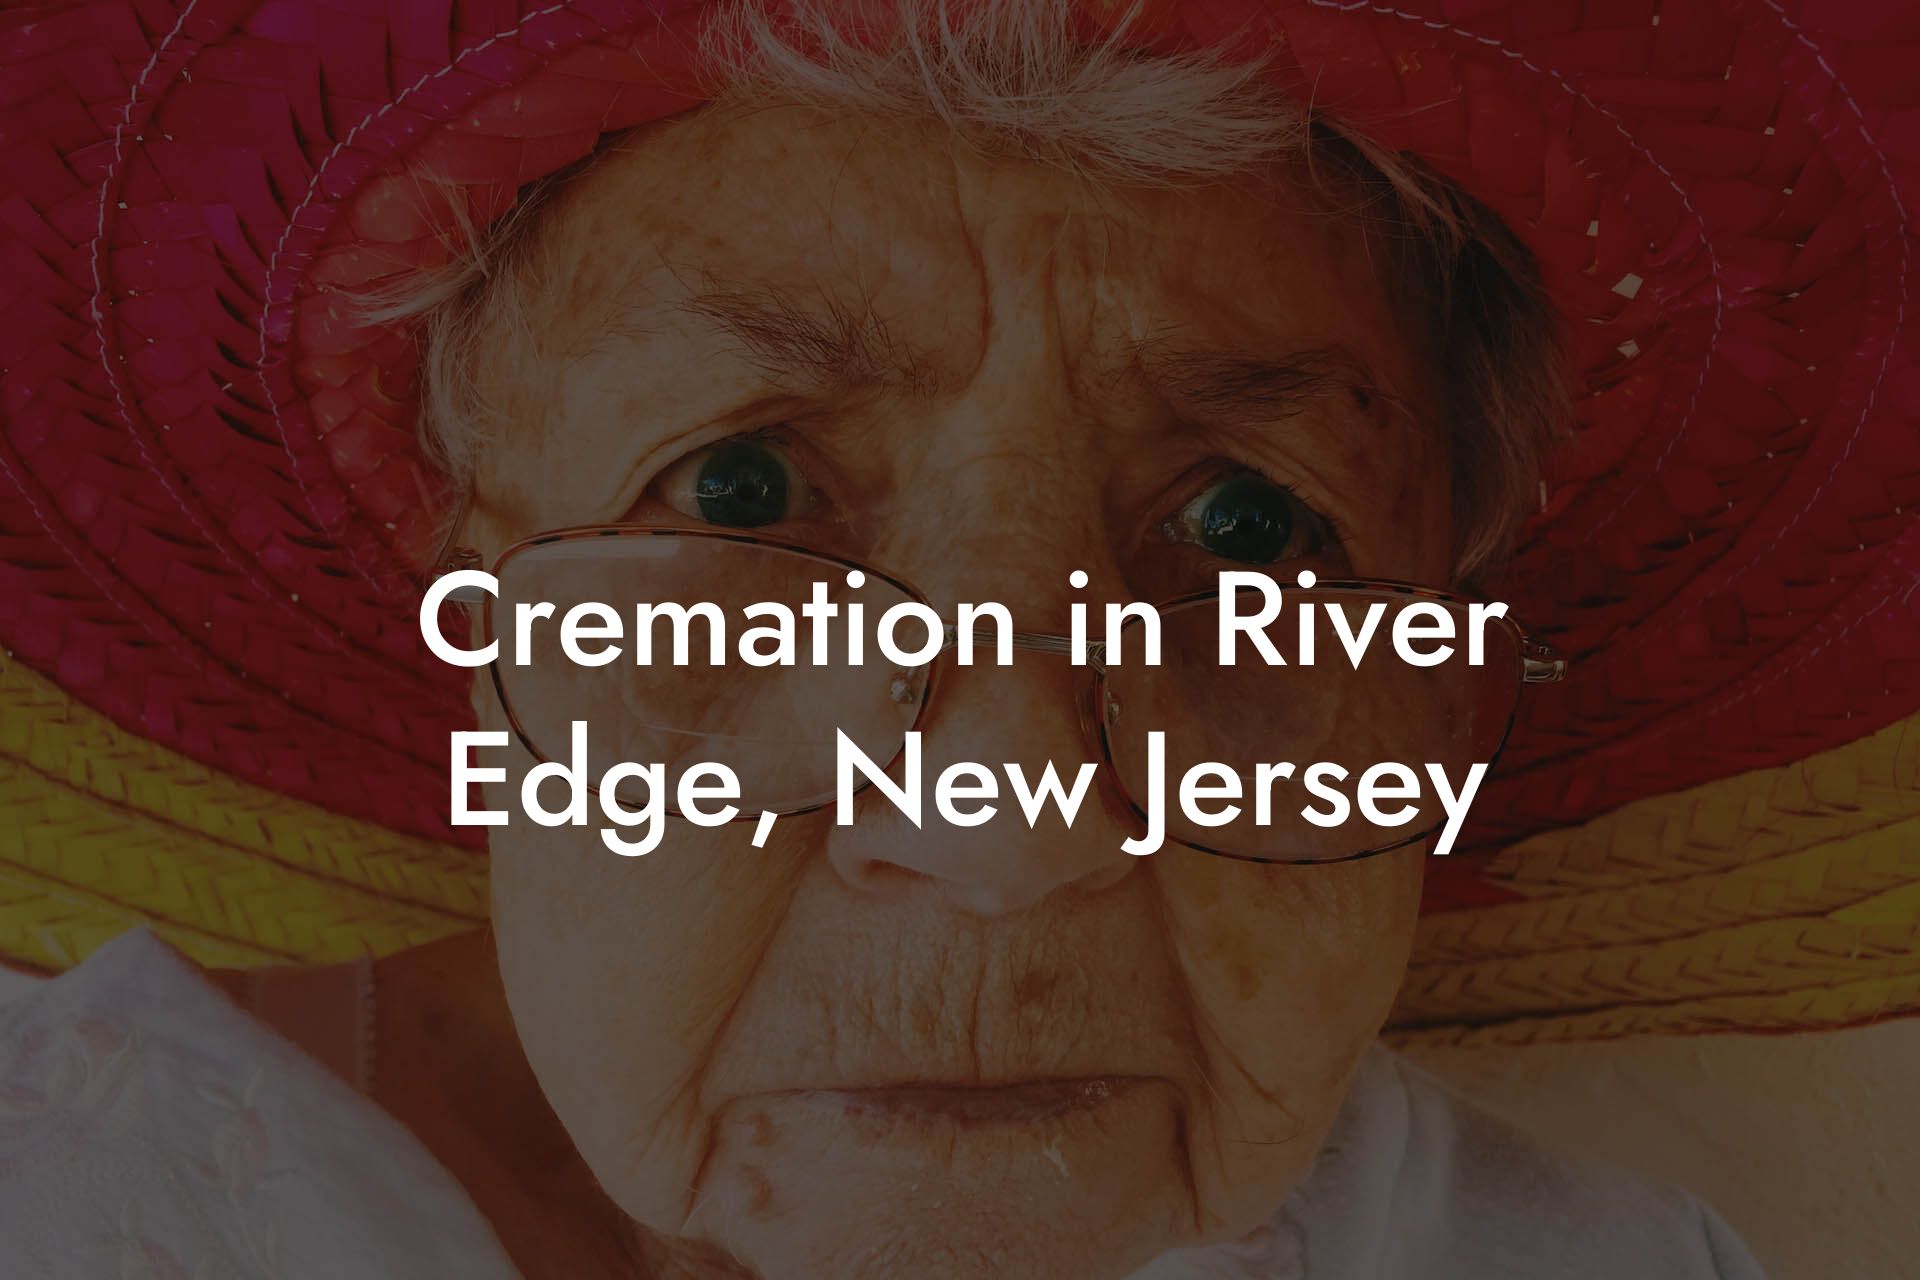 Cremation in River Edge, New Jersey